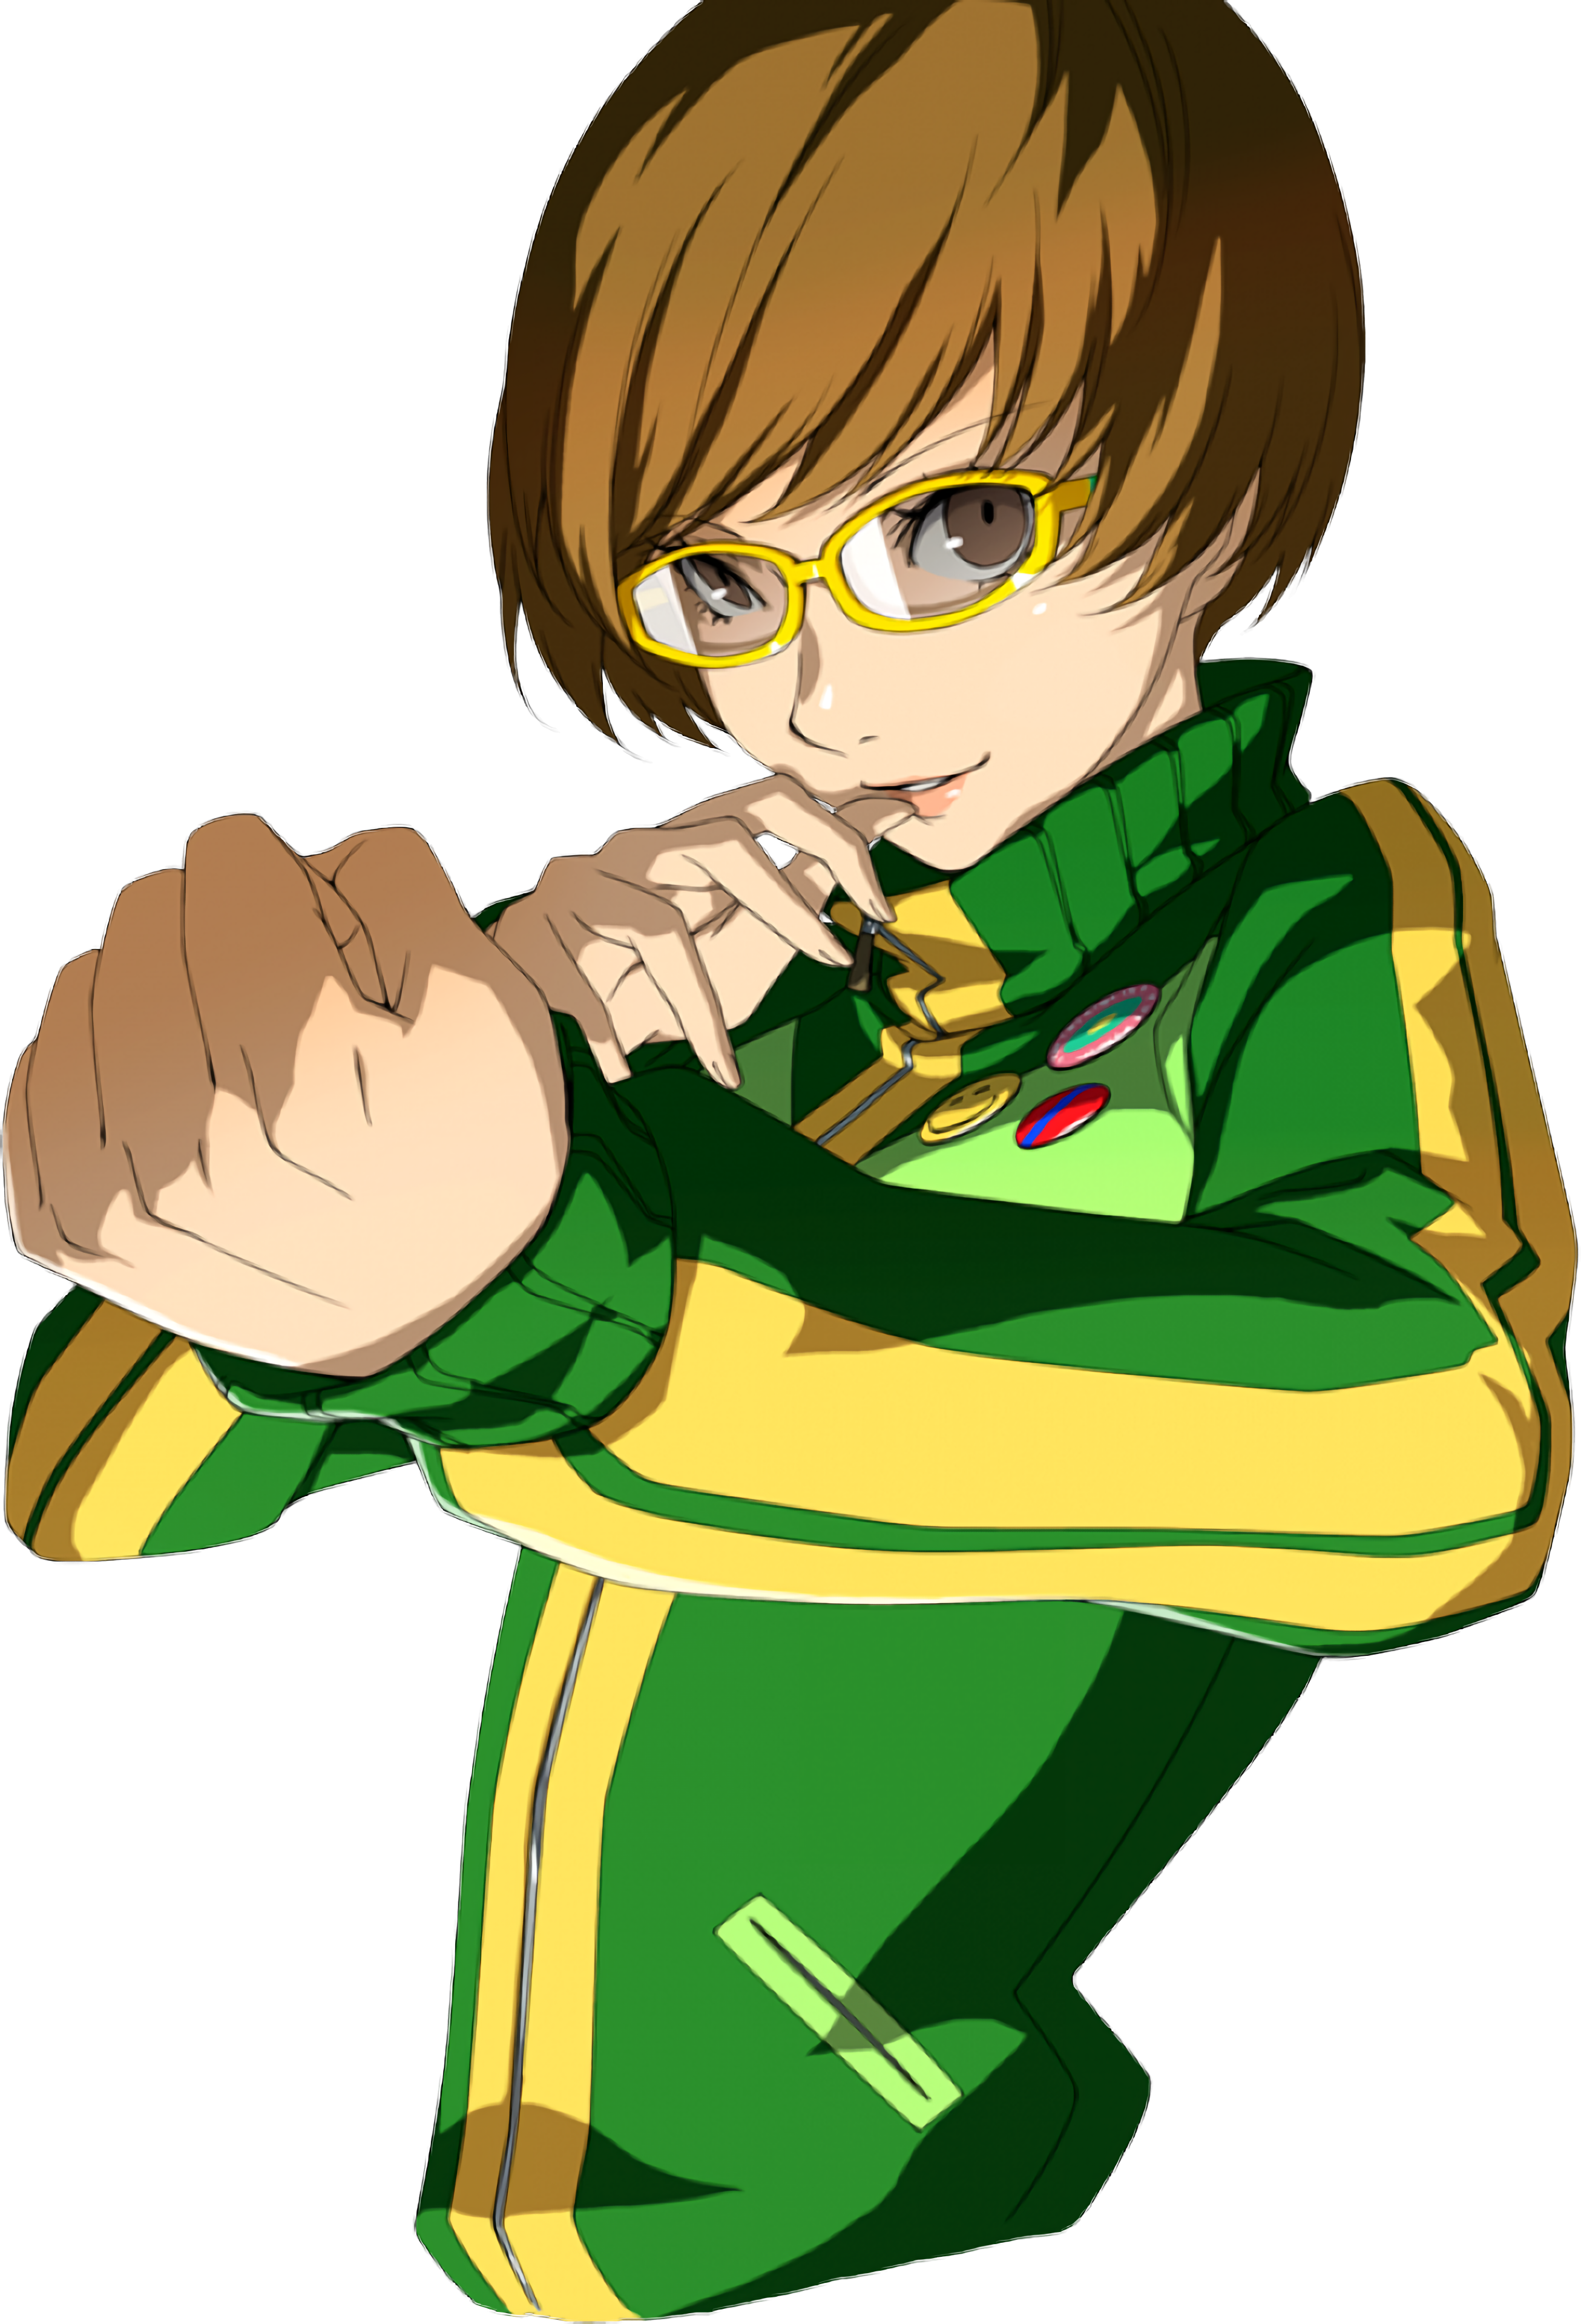 Chie Satonaka (Persona 4 Arena) by L-Dawg211 on DeviantArt